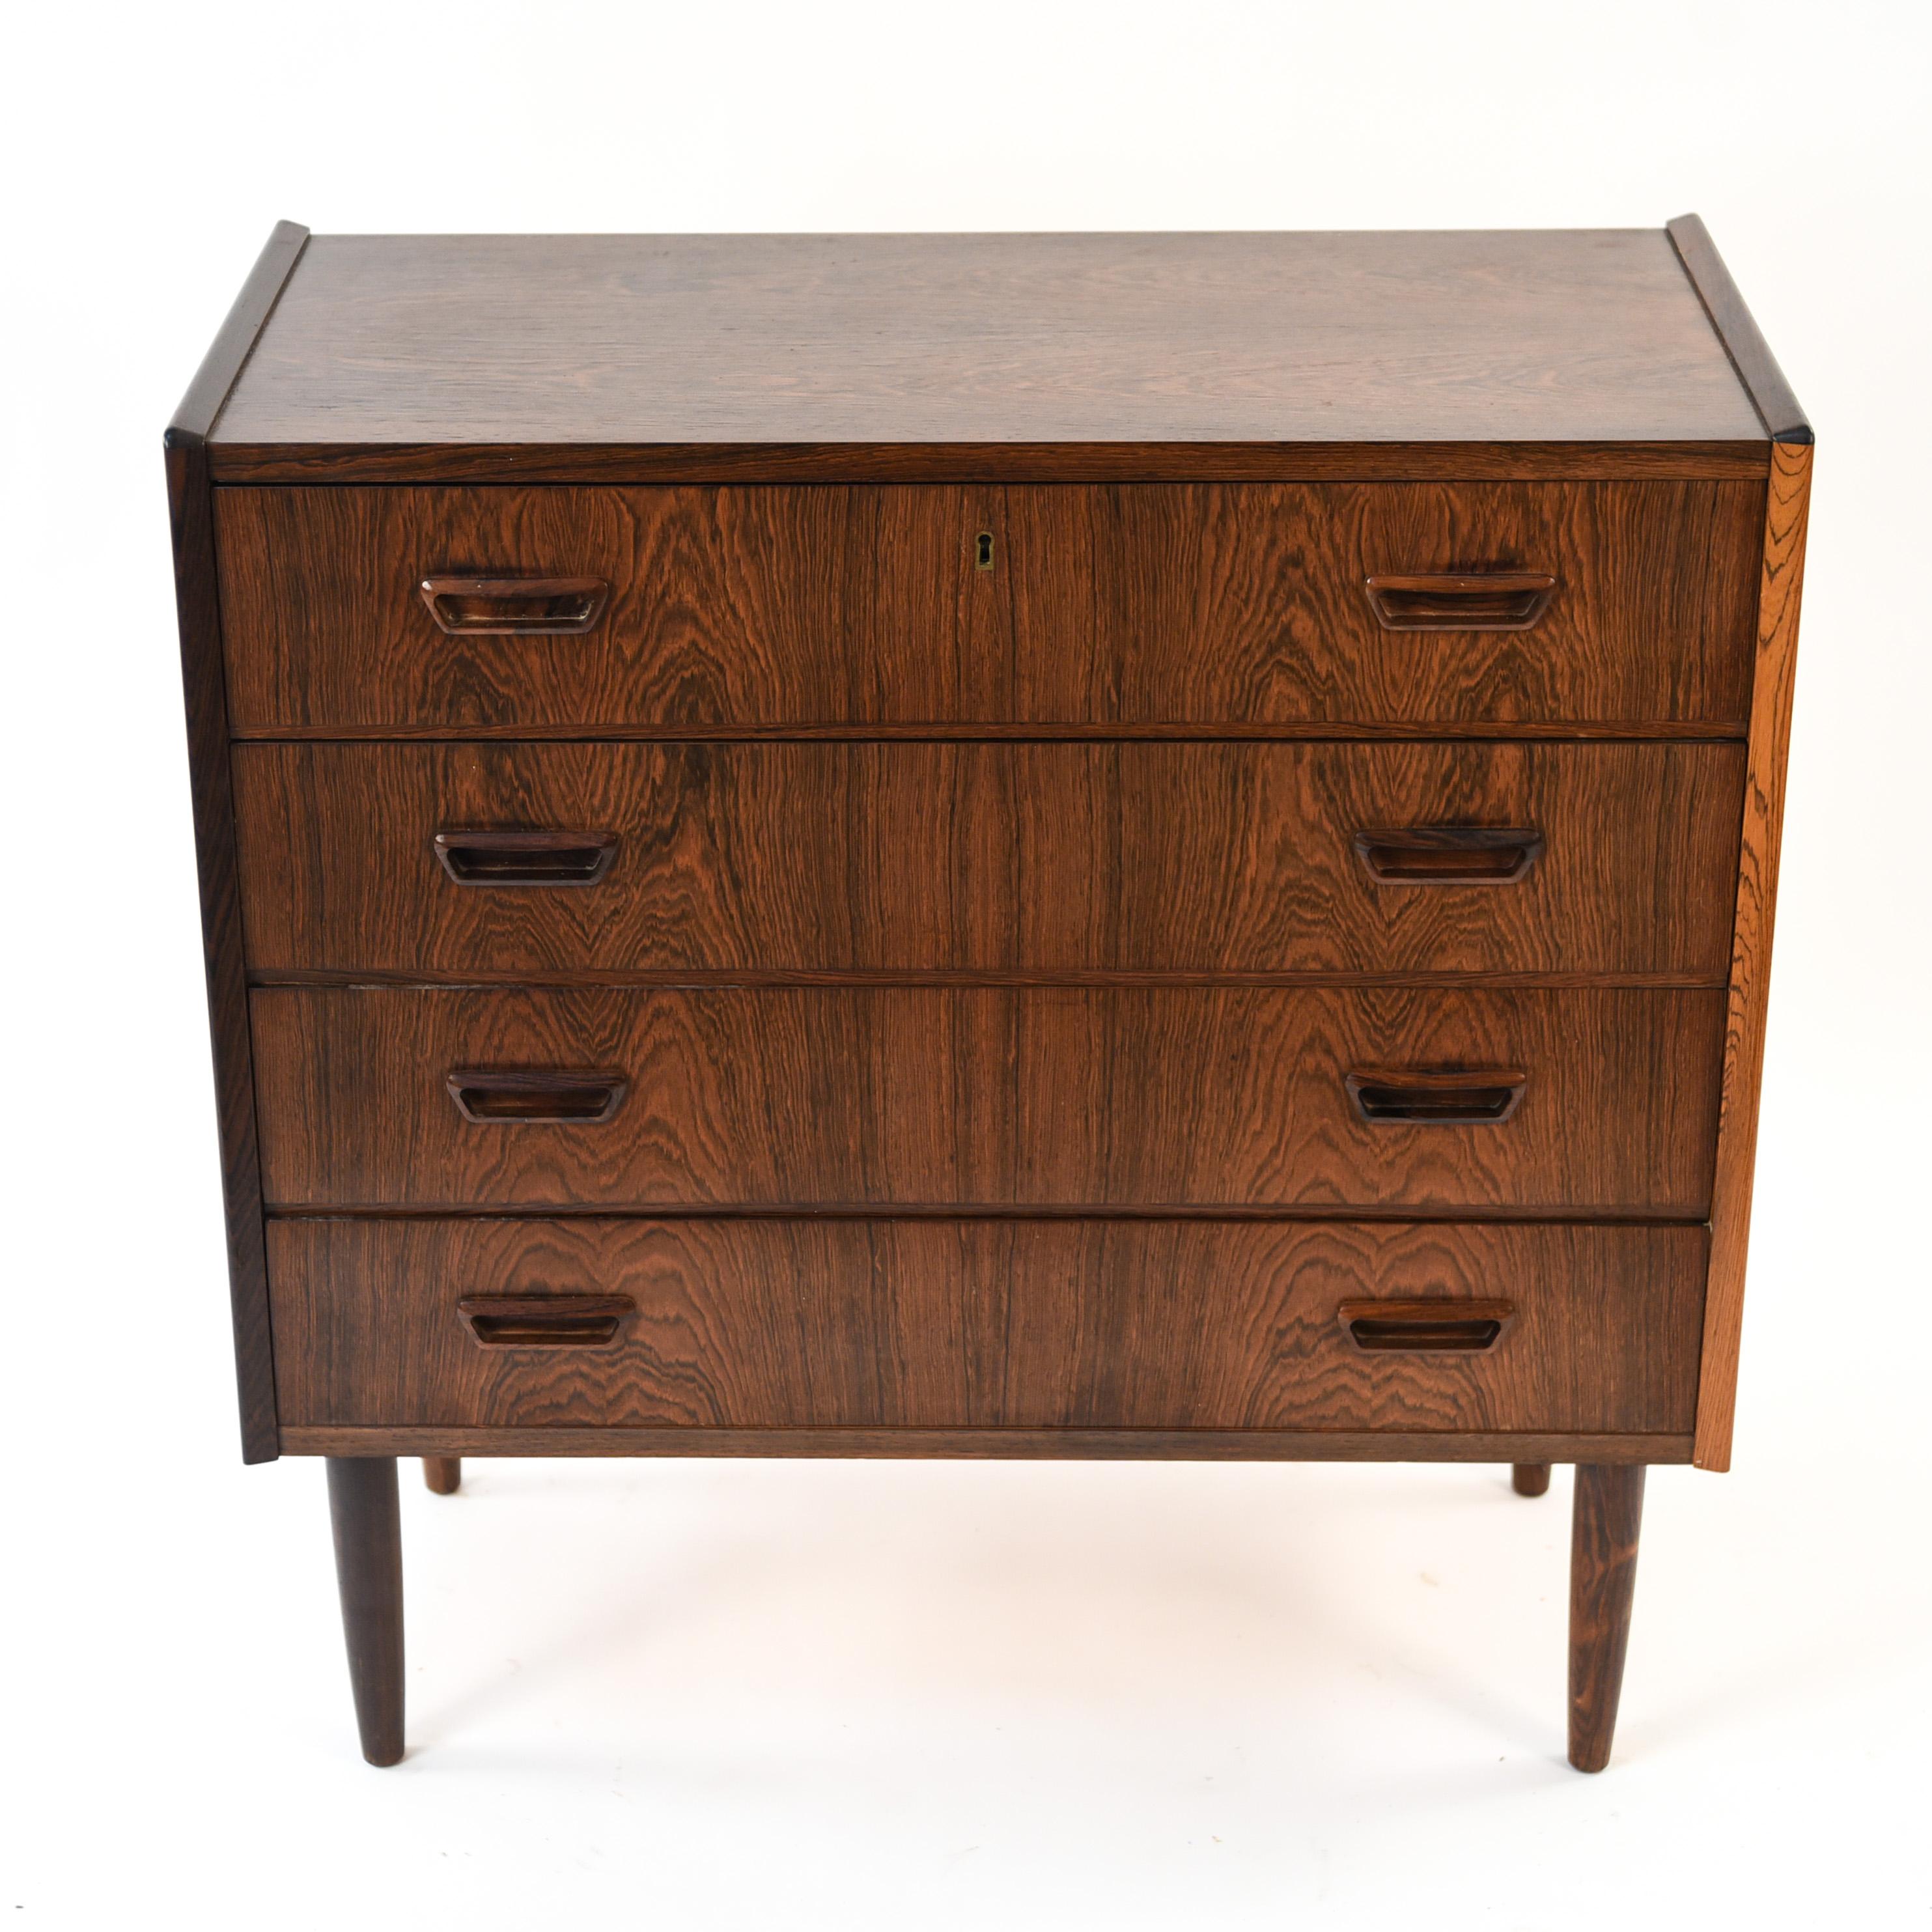 This Danish midcentury four-drawer rosewood chest would be an ideal apartment living piece due to its petite, compact size. The rich color and grain of the rosewood show the quality of this Danish Modern design.